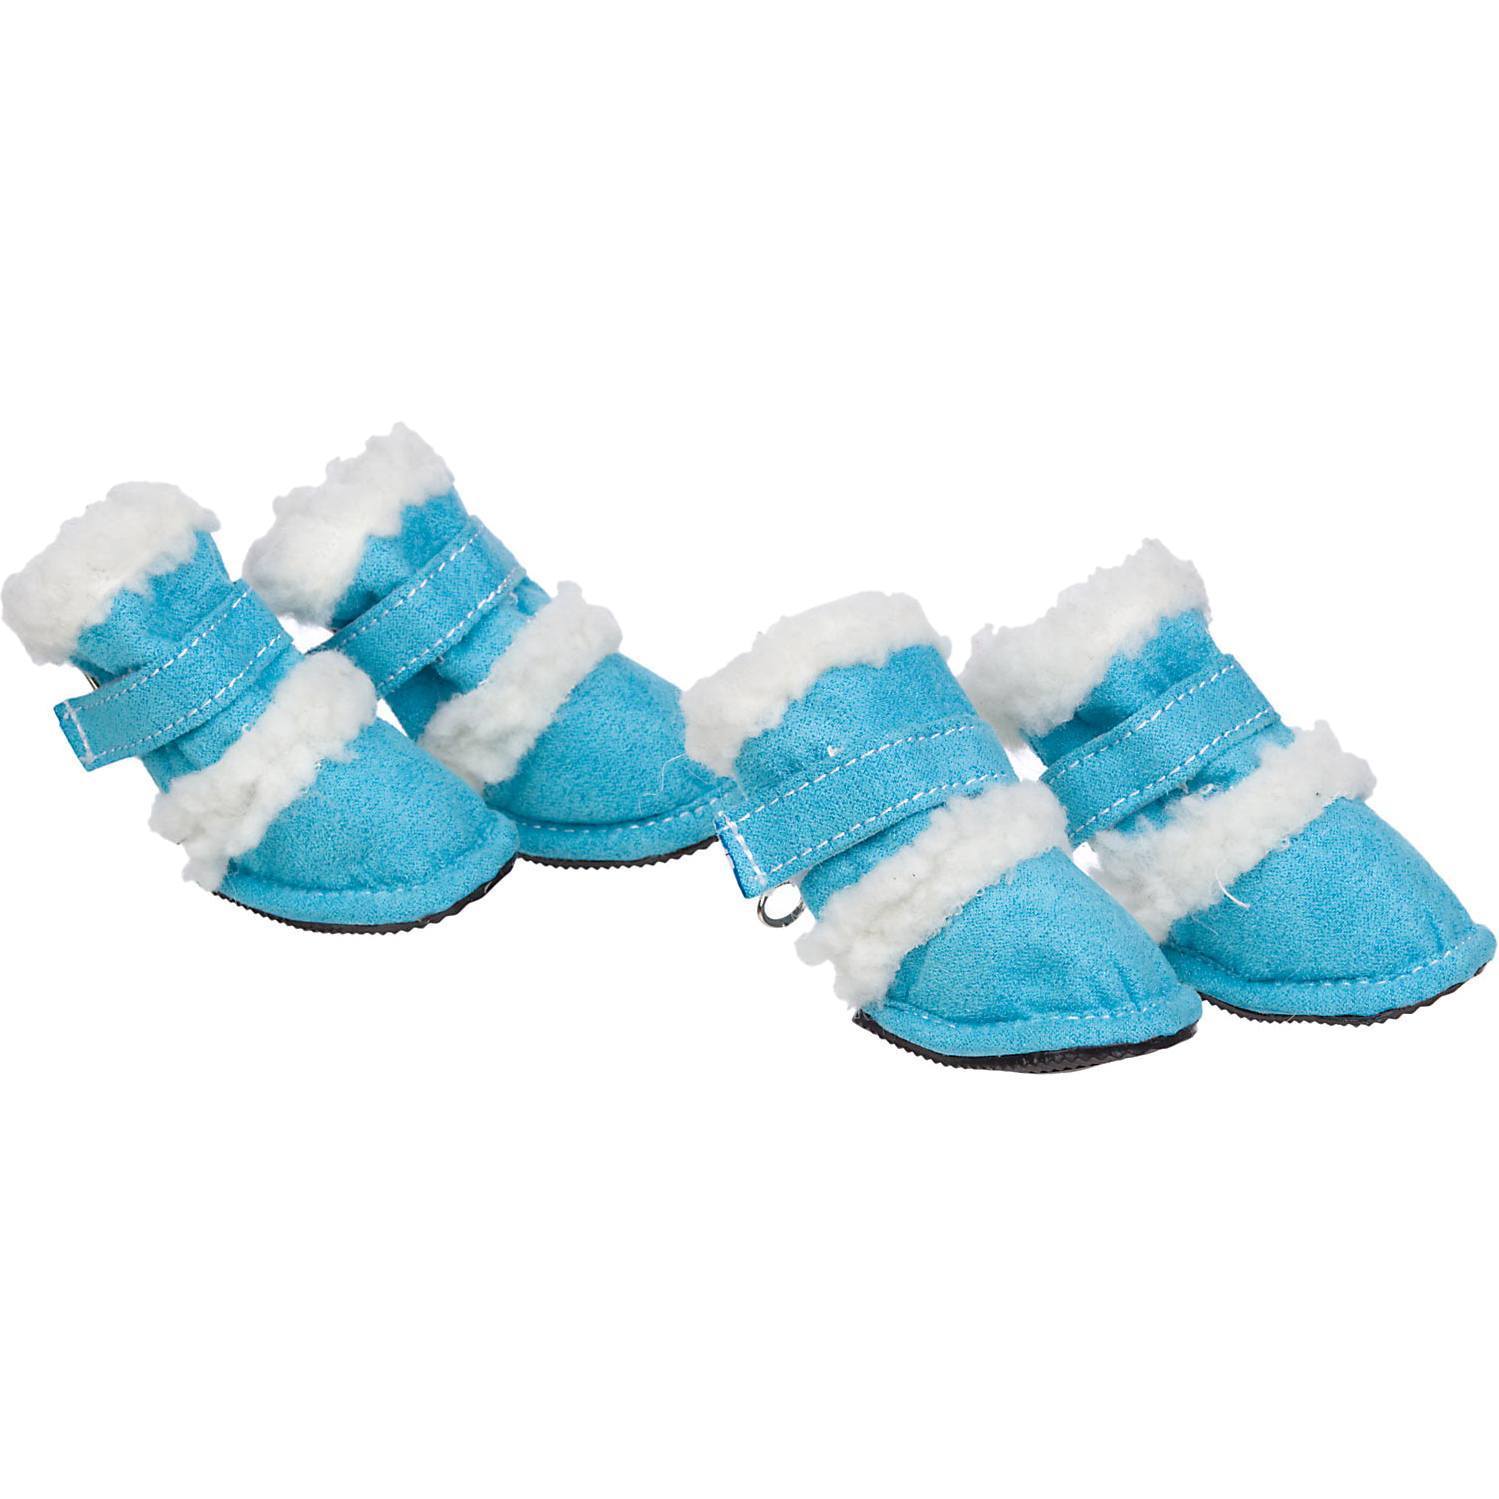 Pet Life ® 'Duggz' 3M Insulated Winter Fashion Dog Shoes Booties - Set of 4 X-Small Blue & White